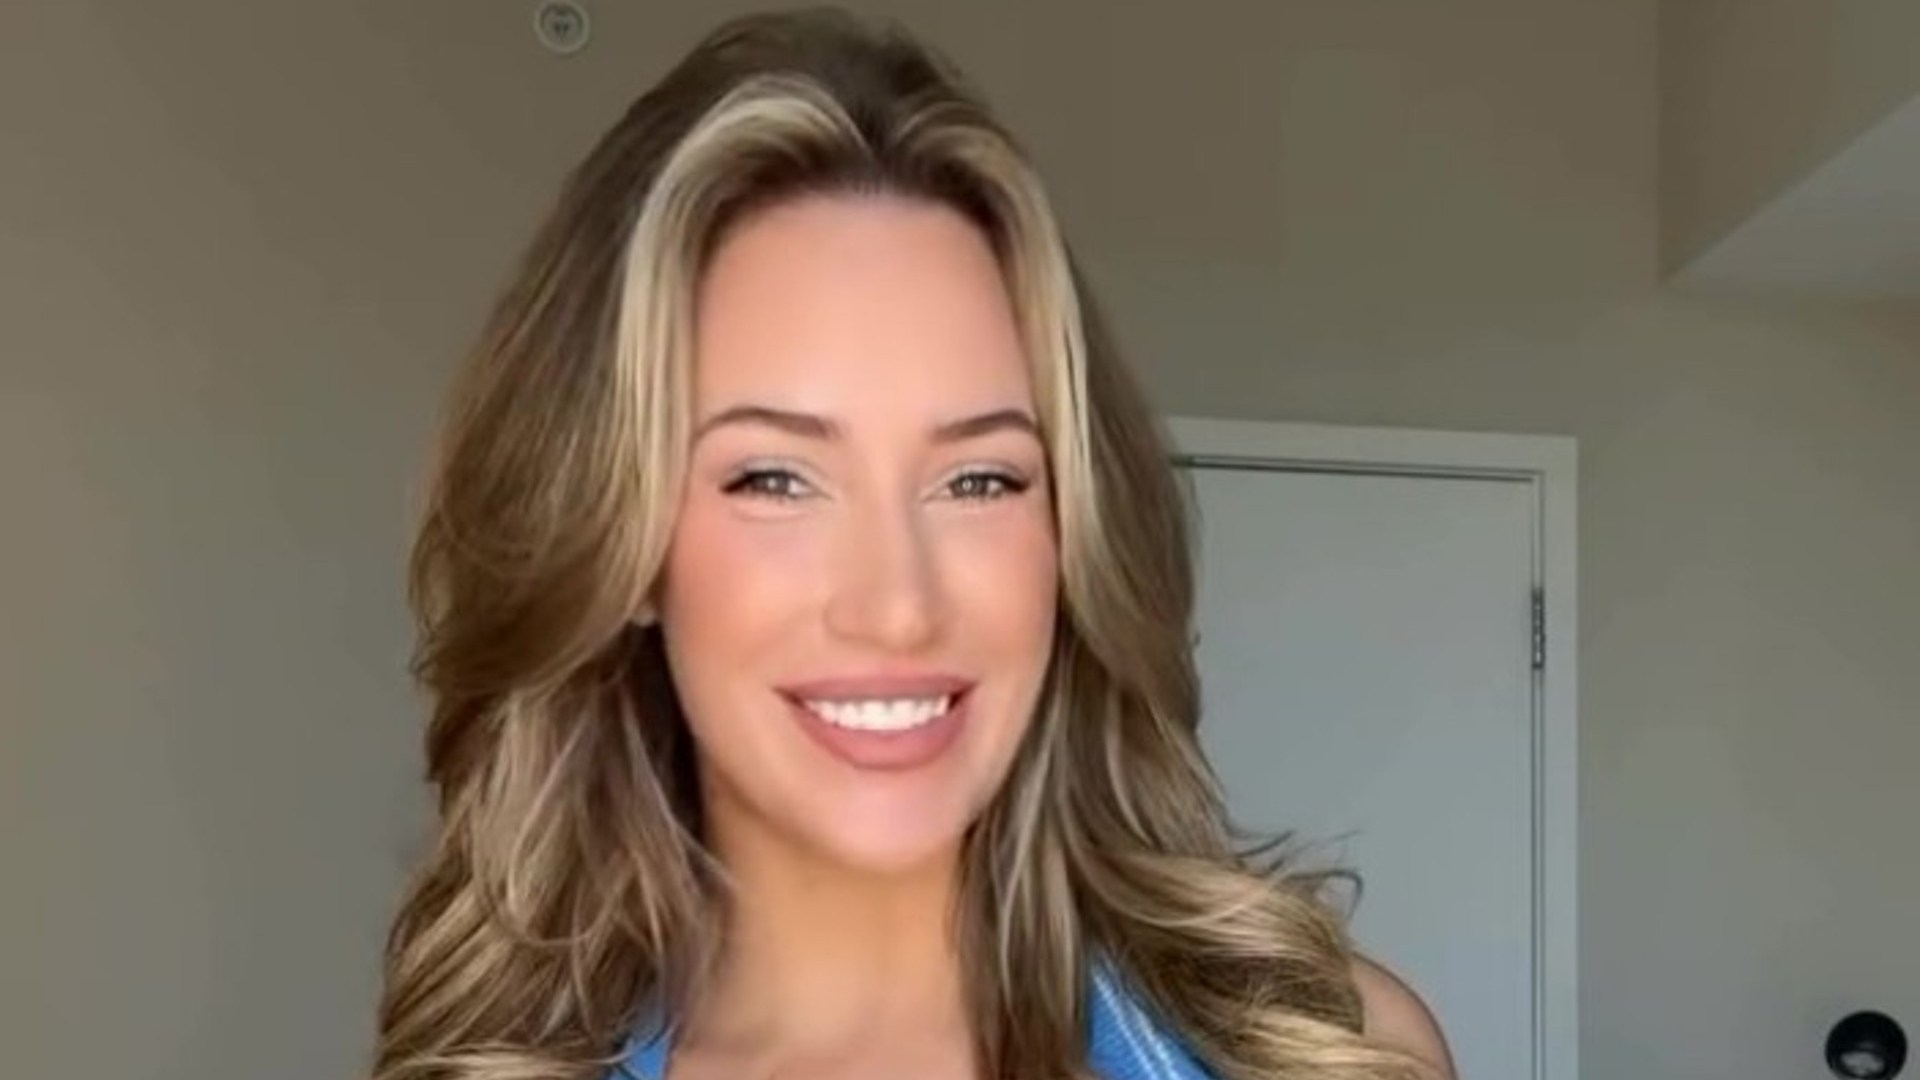 Paige Spiranac’s Stunning New Look Wows Fans with Low-Cut Top – Golf Sensation’s Glam Transformation